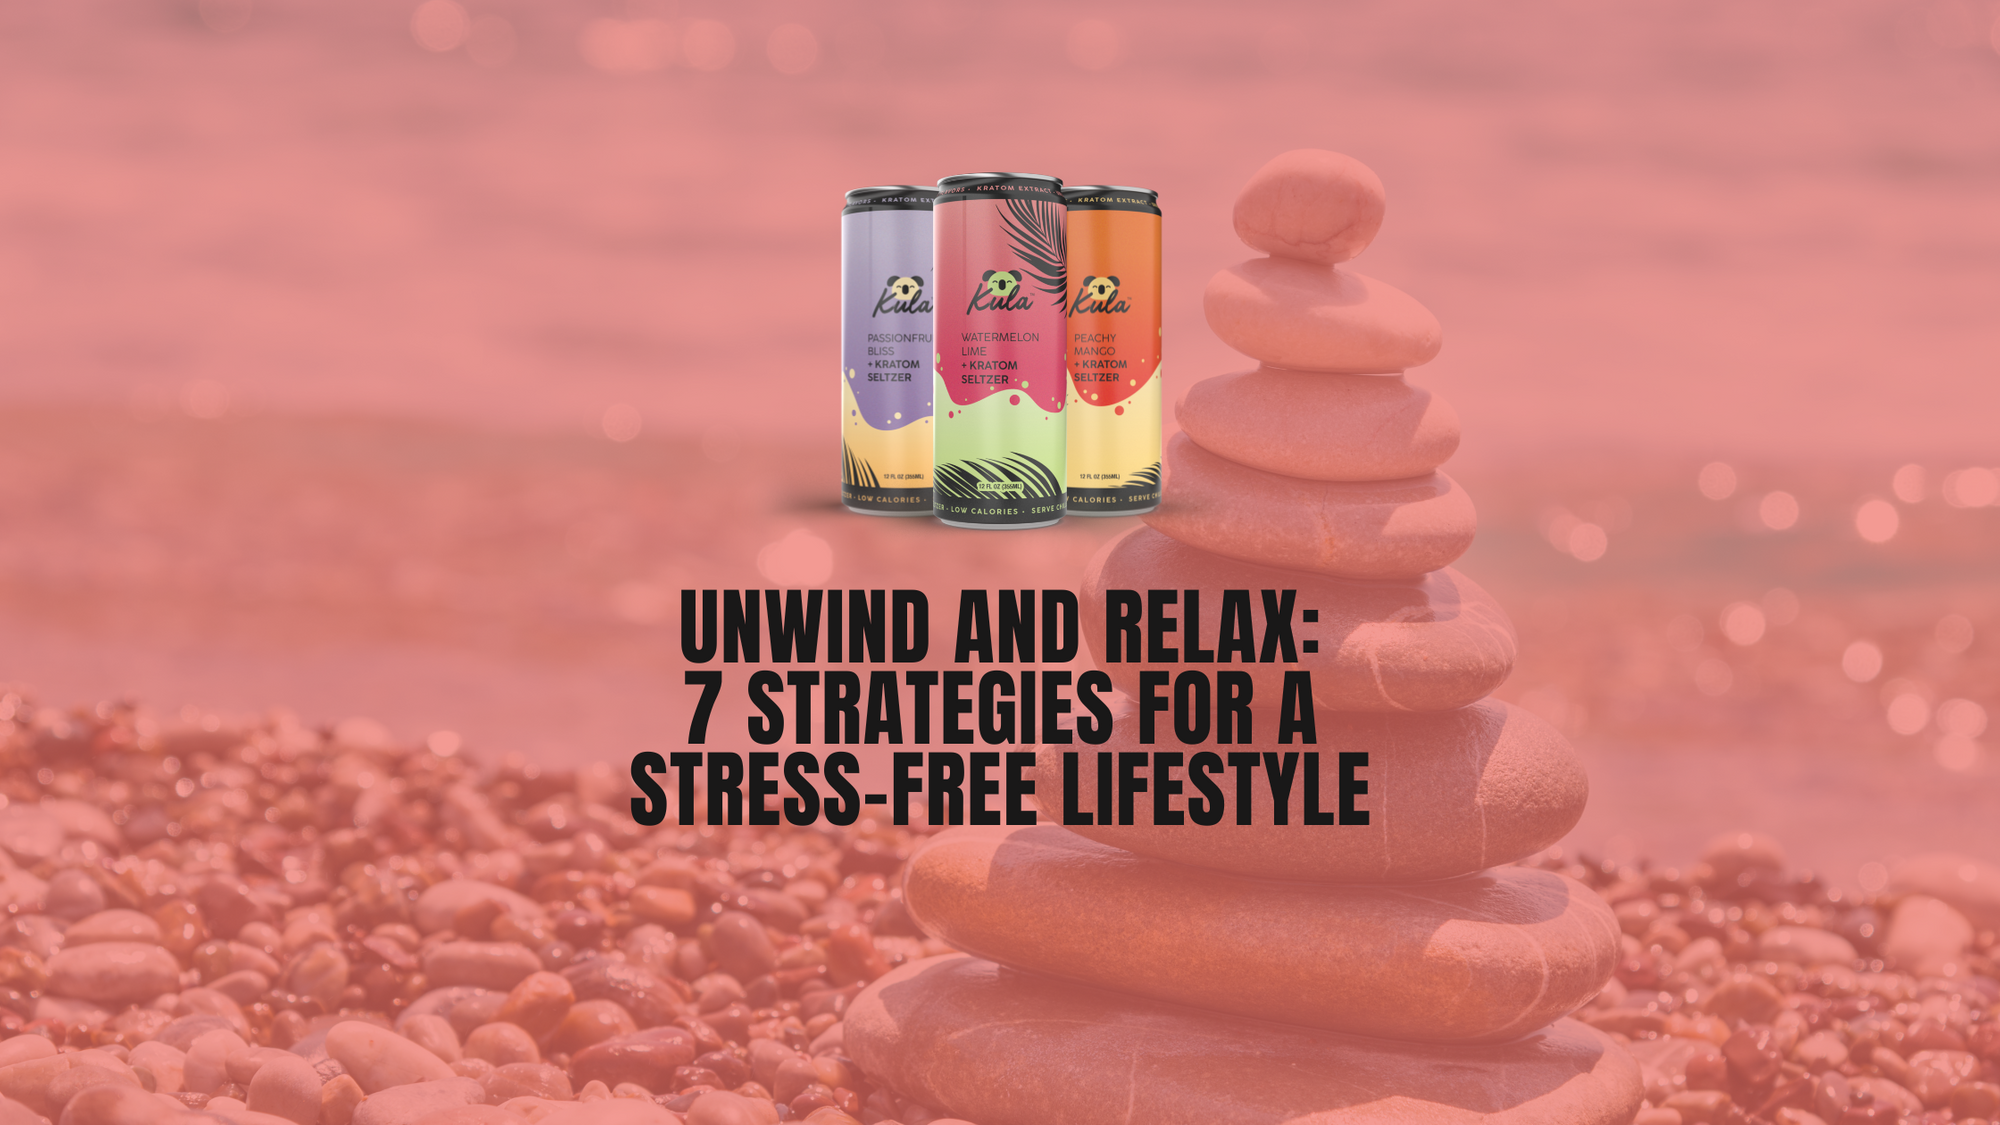 Unwind and Relax: 7 Strategies for a Stress-Free Lifestyle